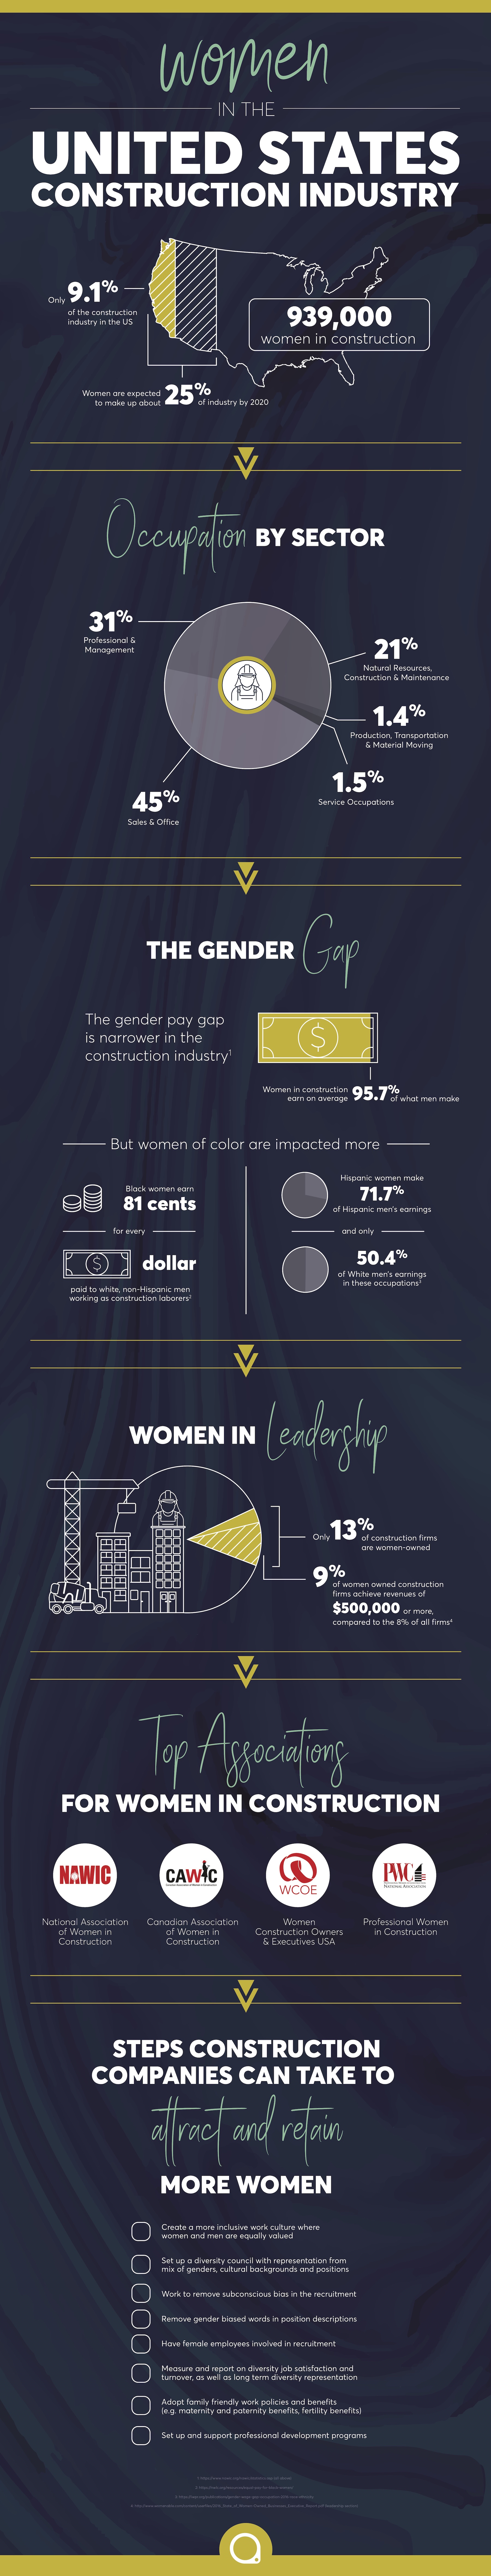 Women-in-Construction-Infographic